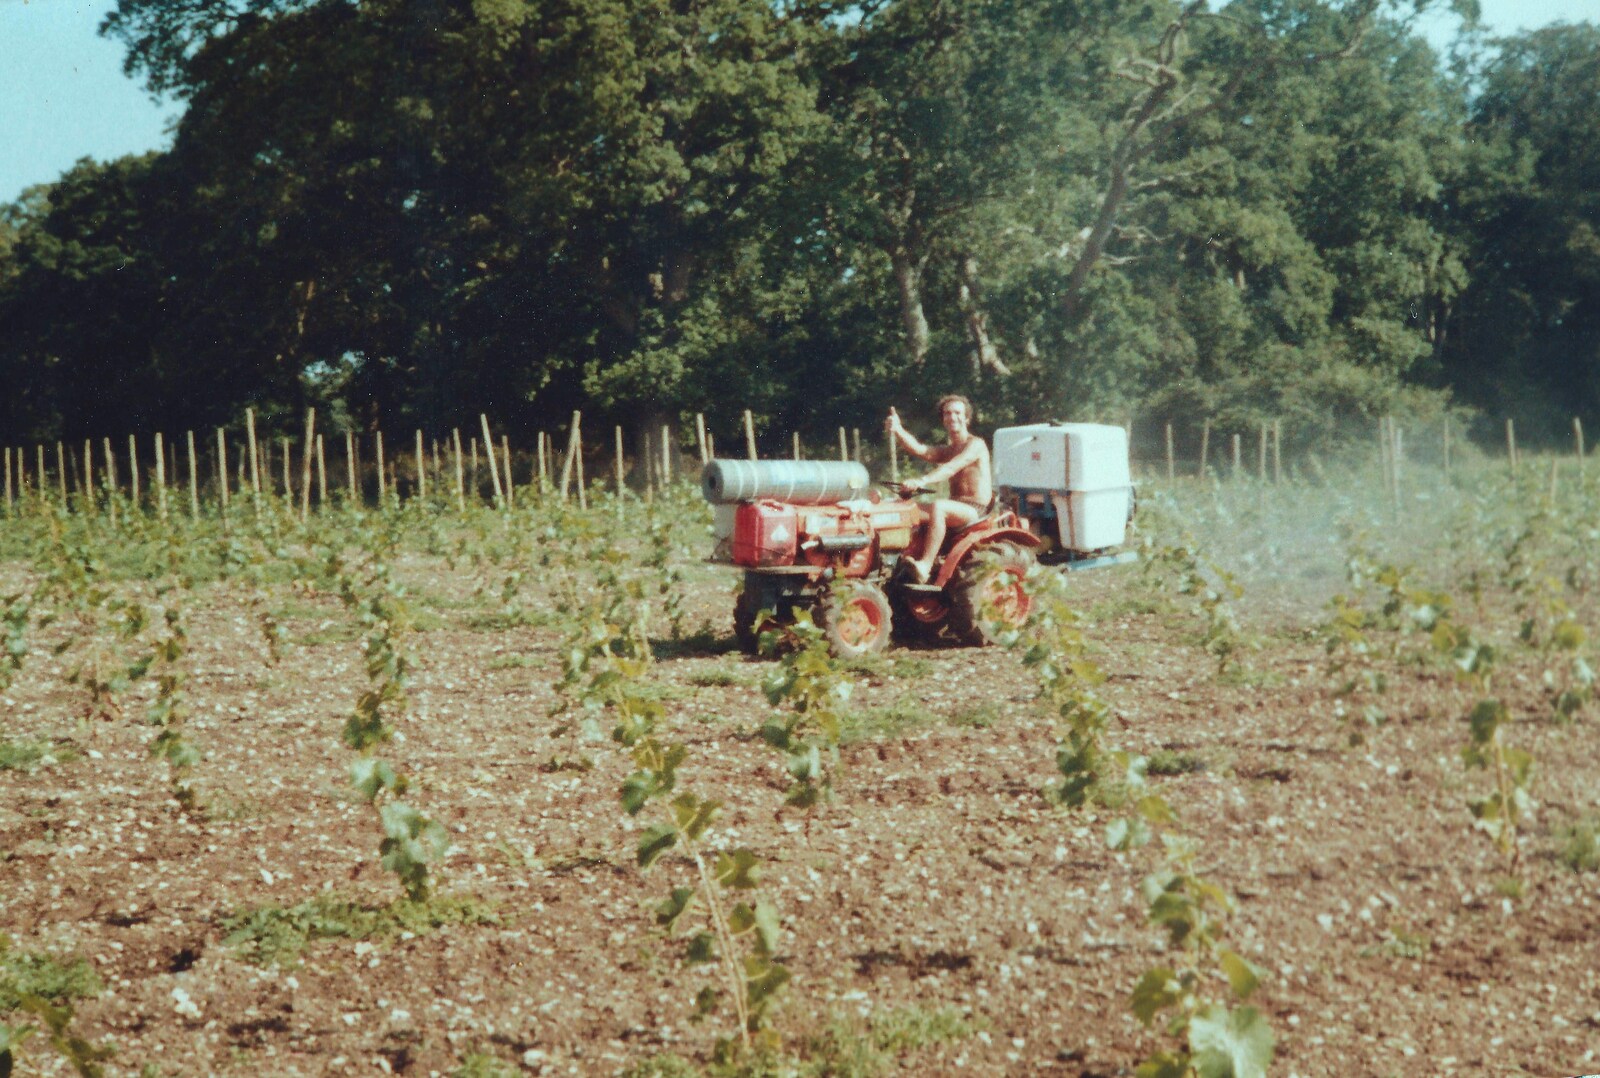 Mike does some tractor spraying from Constructing a Vineyard, Harrow Road, Bransgore, Dorset - 1st September 1981